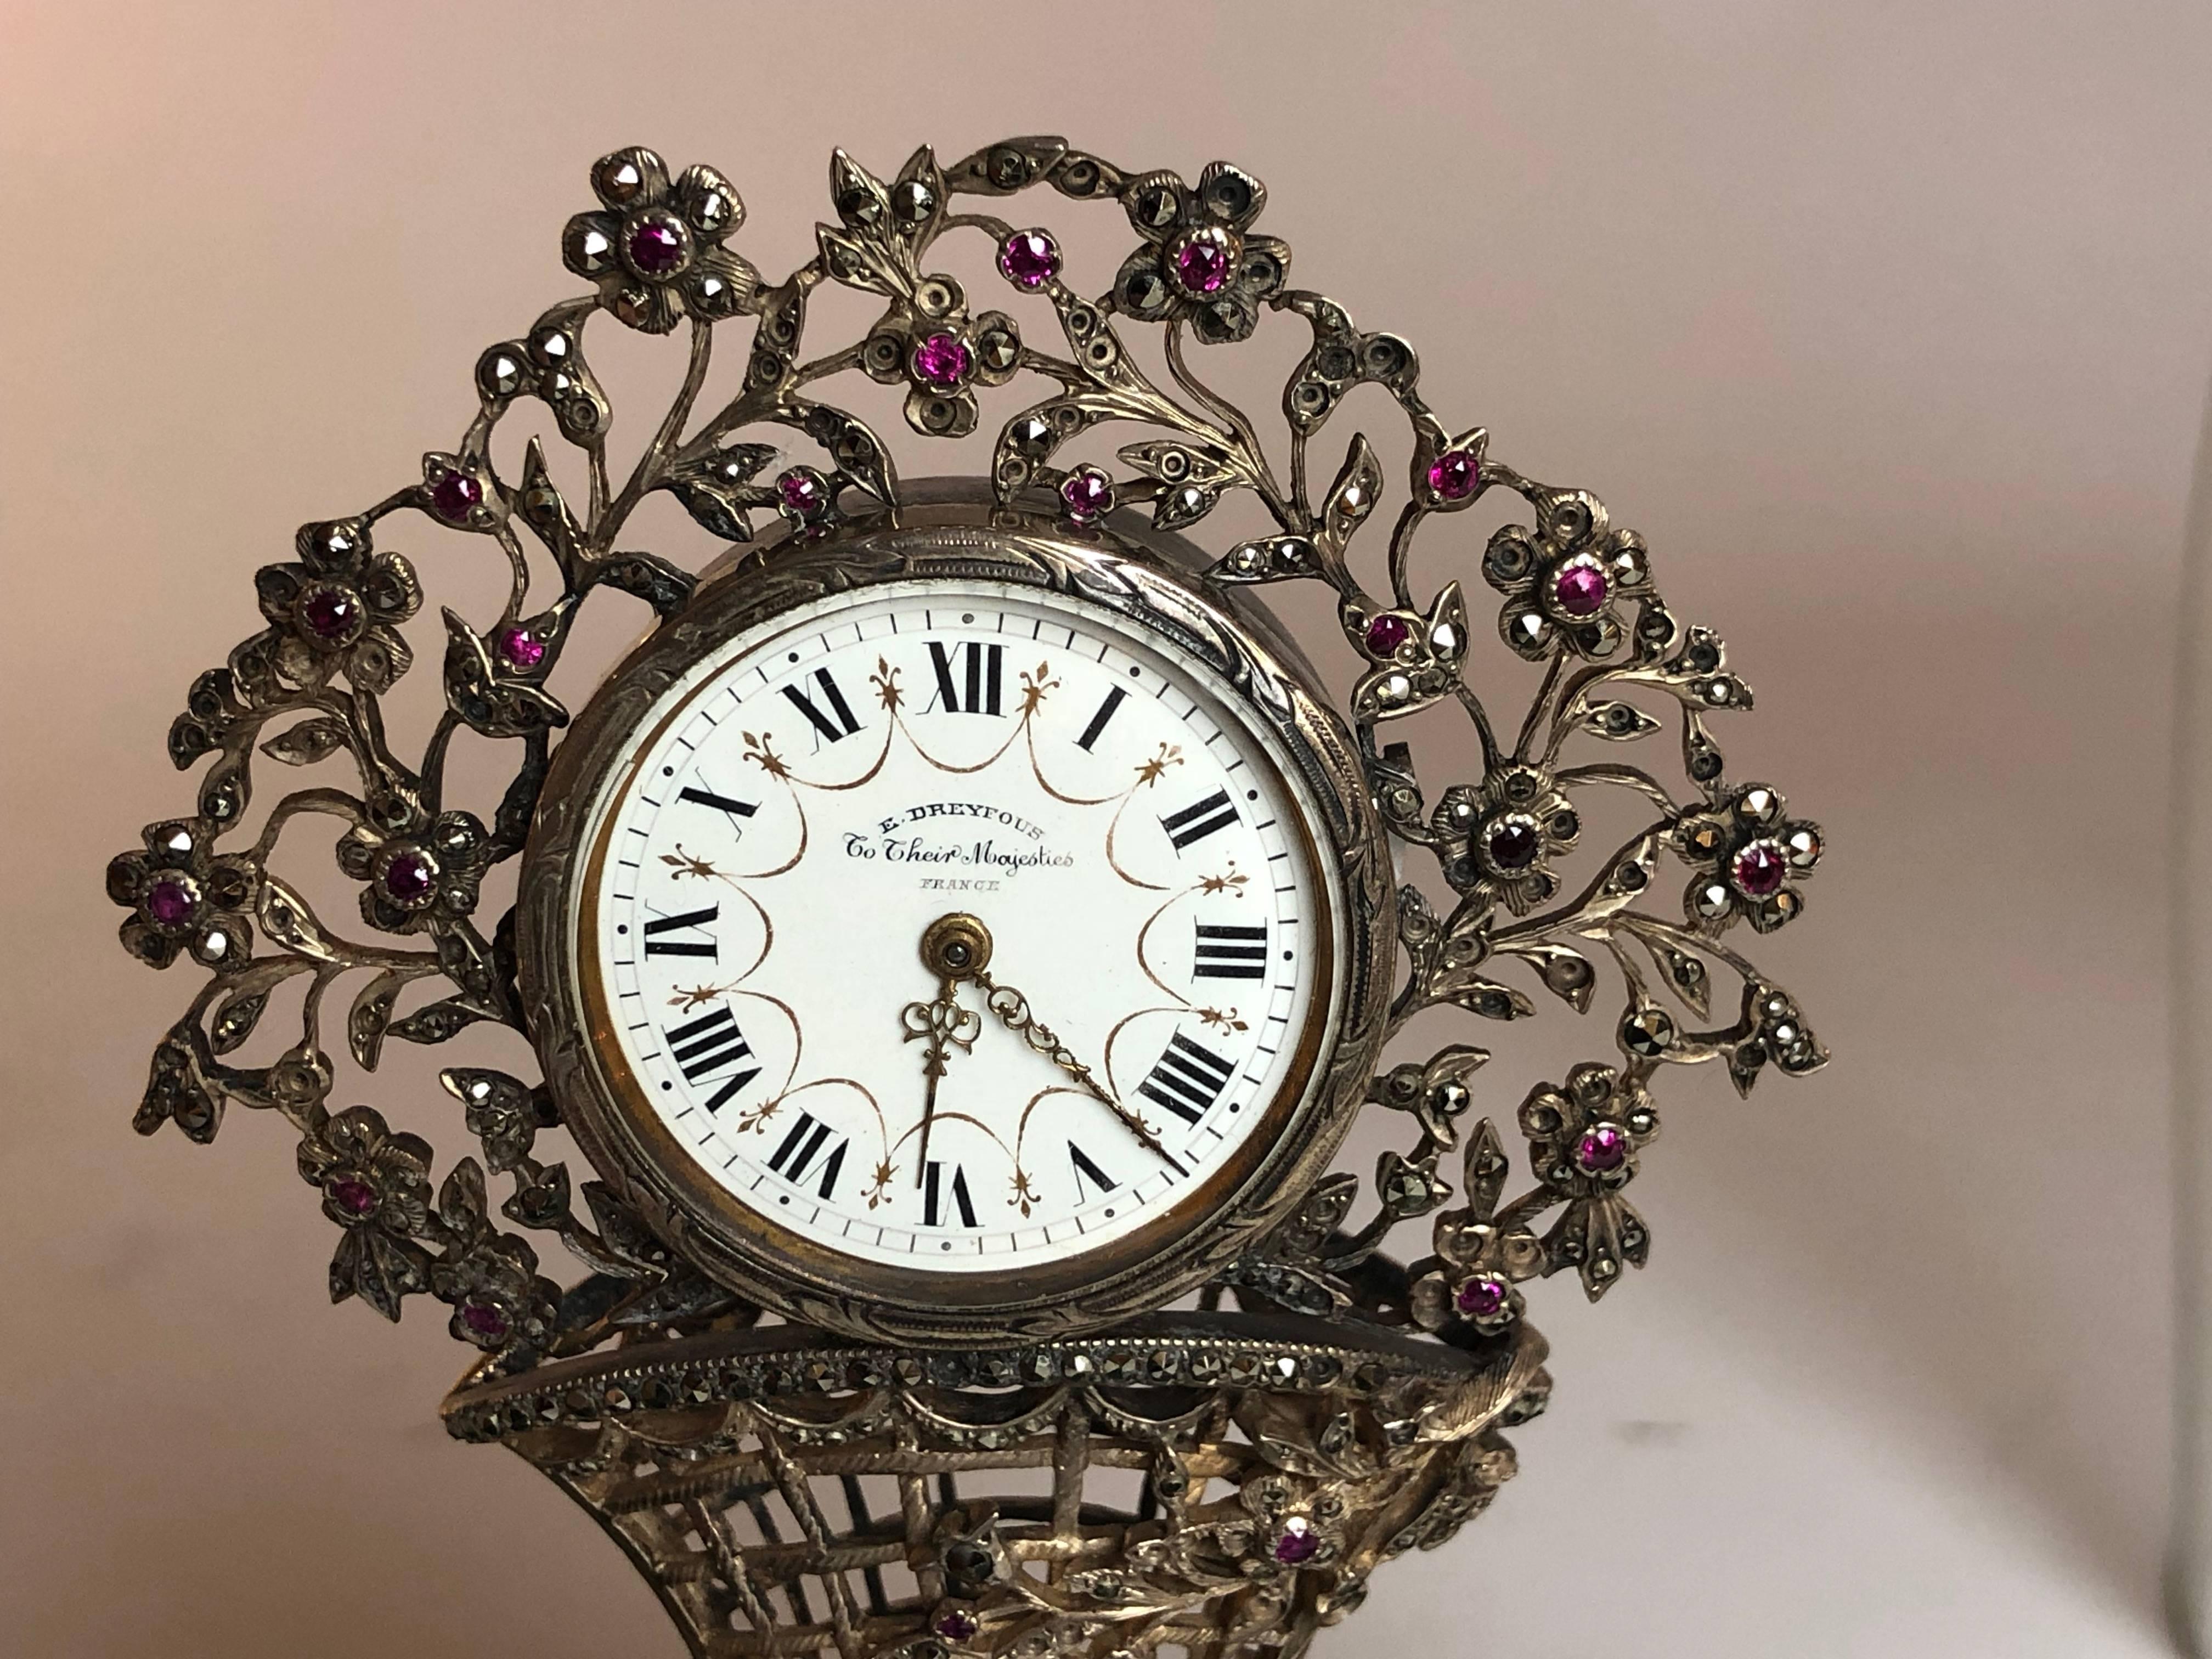 Silver and Precious Stone Miniature Table Clock by Dreyfous, 1880 1